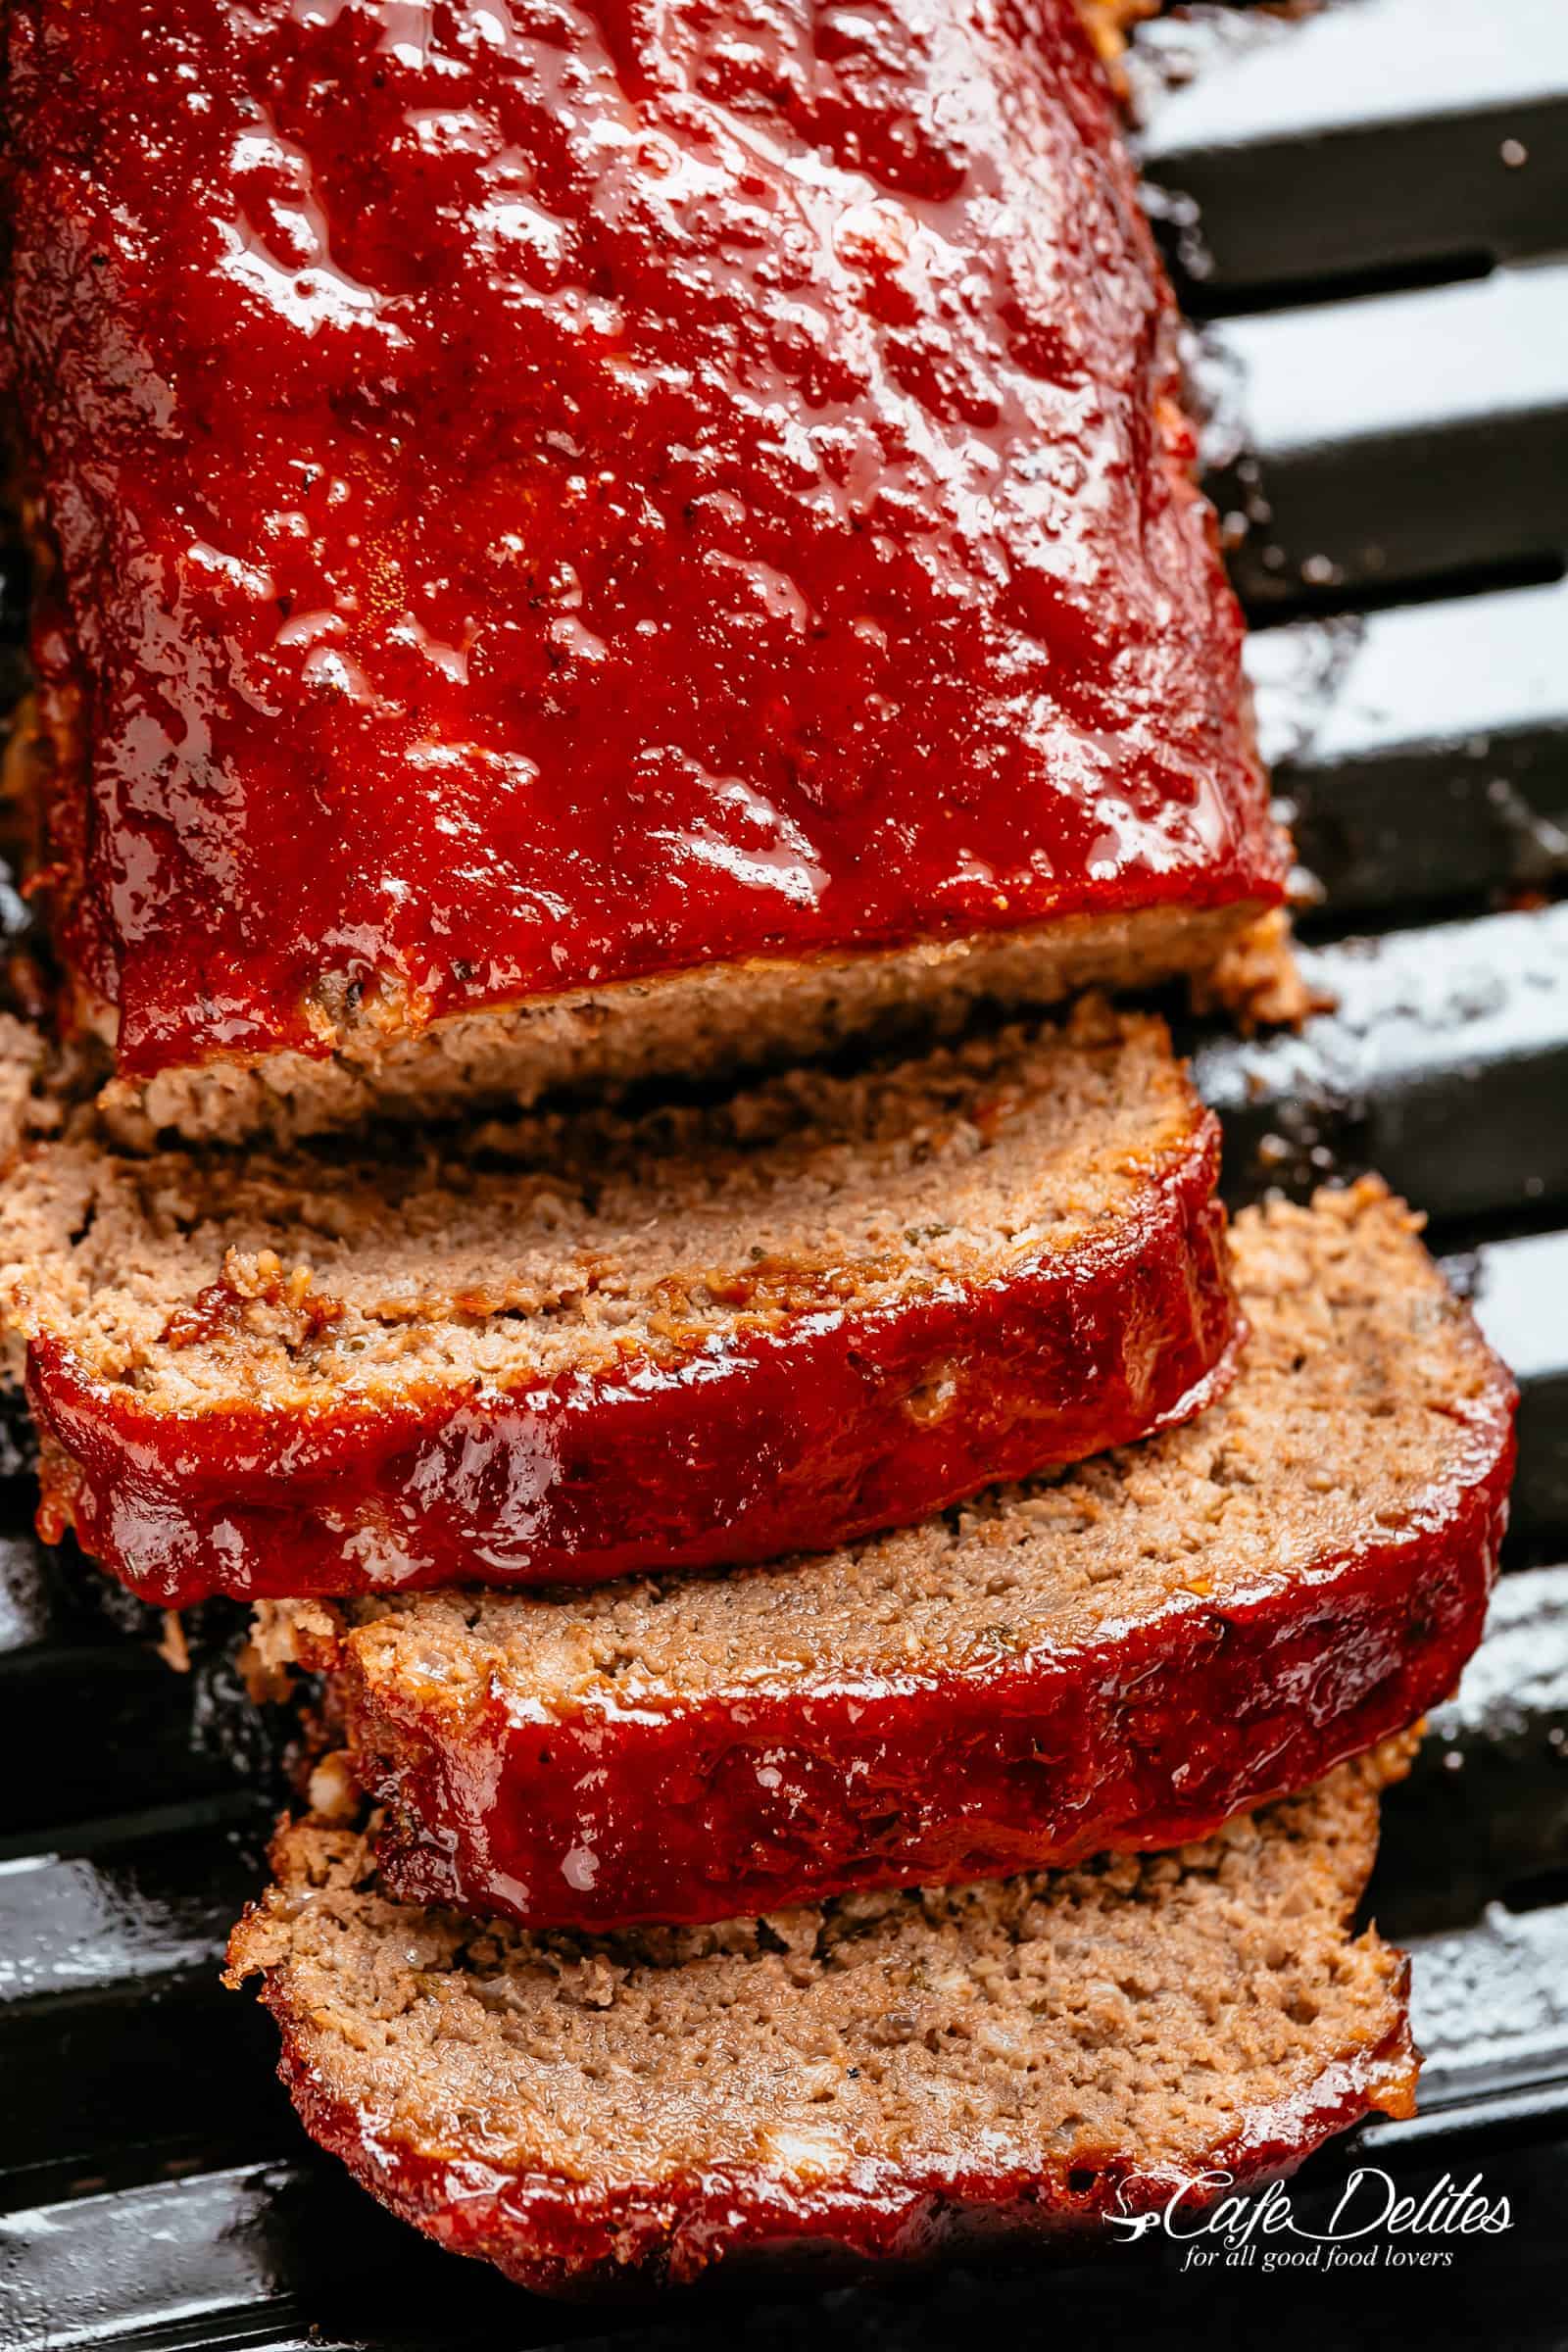 How to make the best tender and juicy Meatloaf with a delicious shiny glaze! Cheap, easy and quick to prepare, let the oven do all the work for you! The whole family goes crazy over each slice of this meatloaf recipe. PLUS... take advantage of leftovers and turn them into the best meatloaf sandwiches! | cafedelites.com